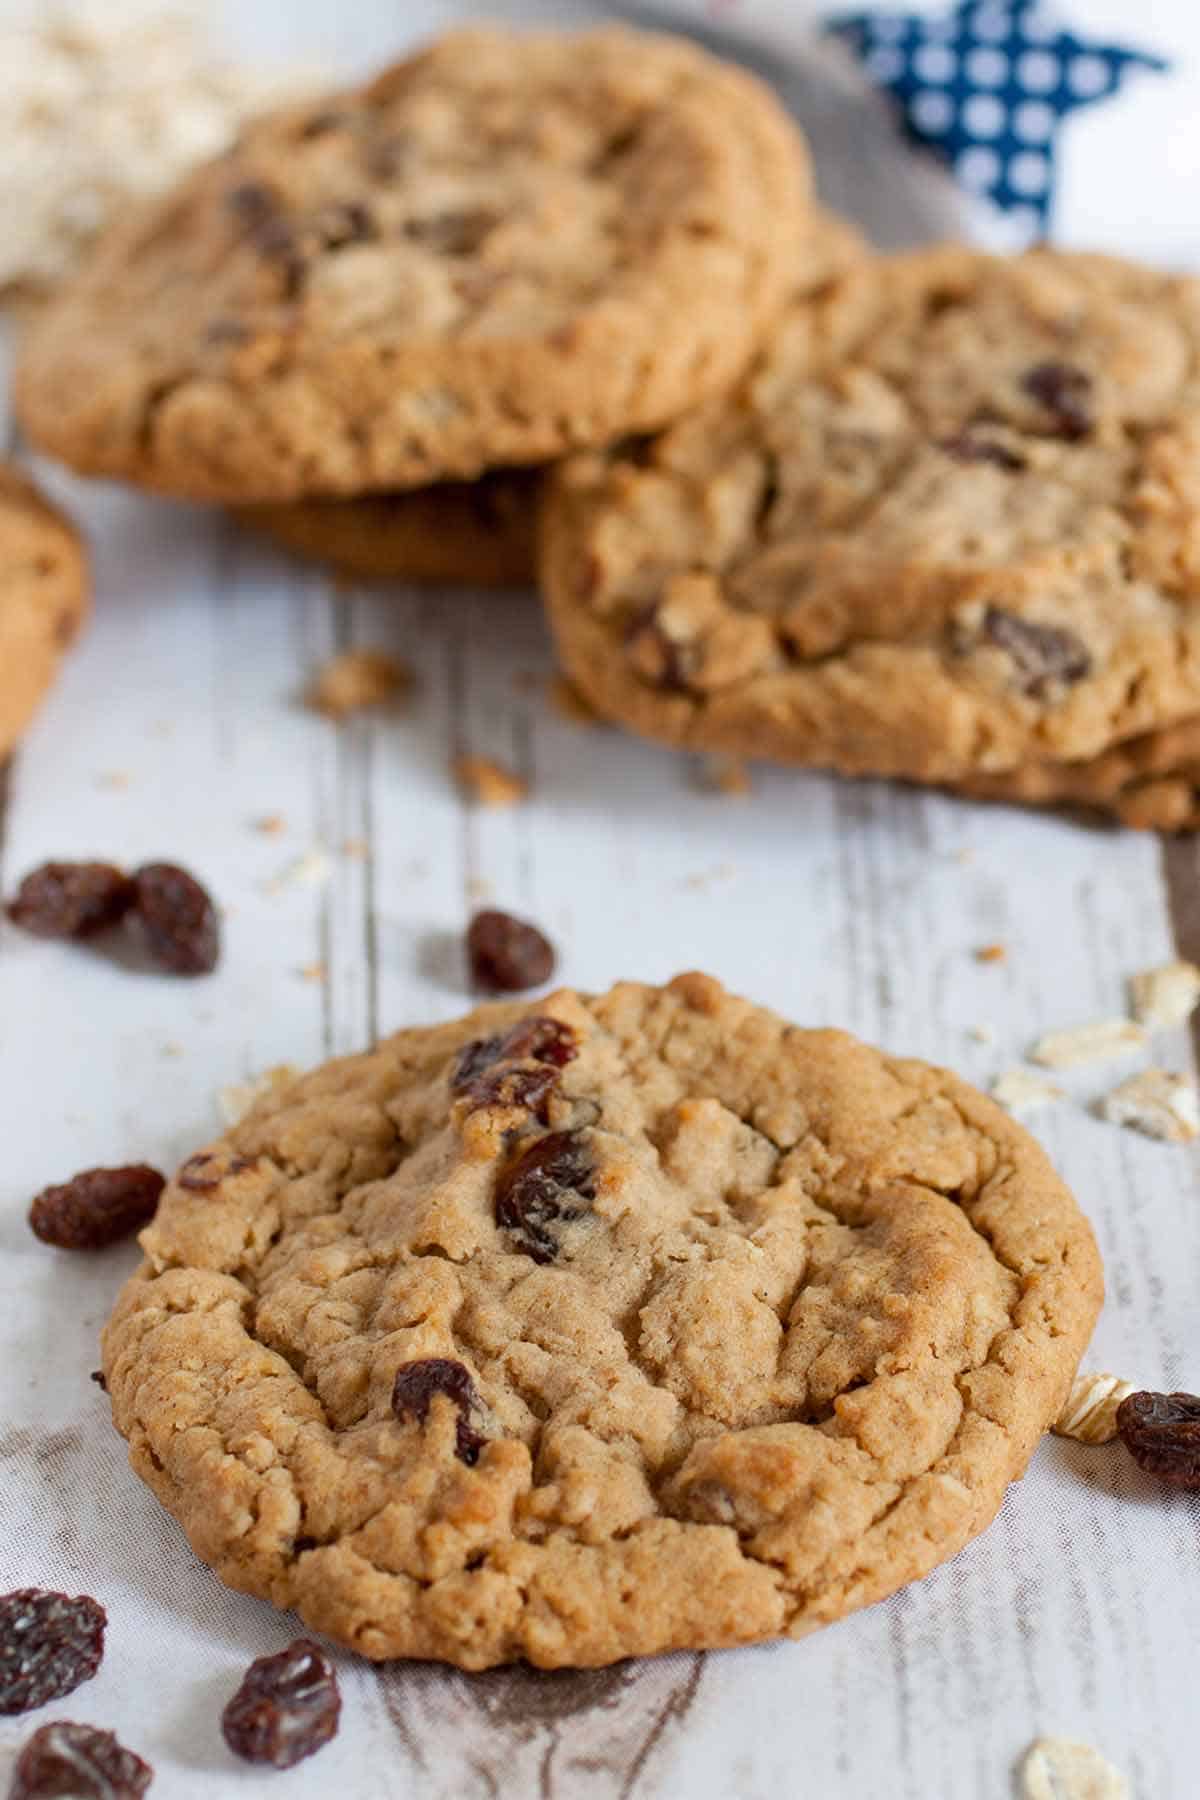 Cookies with raisins on a serving board.